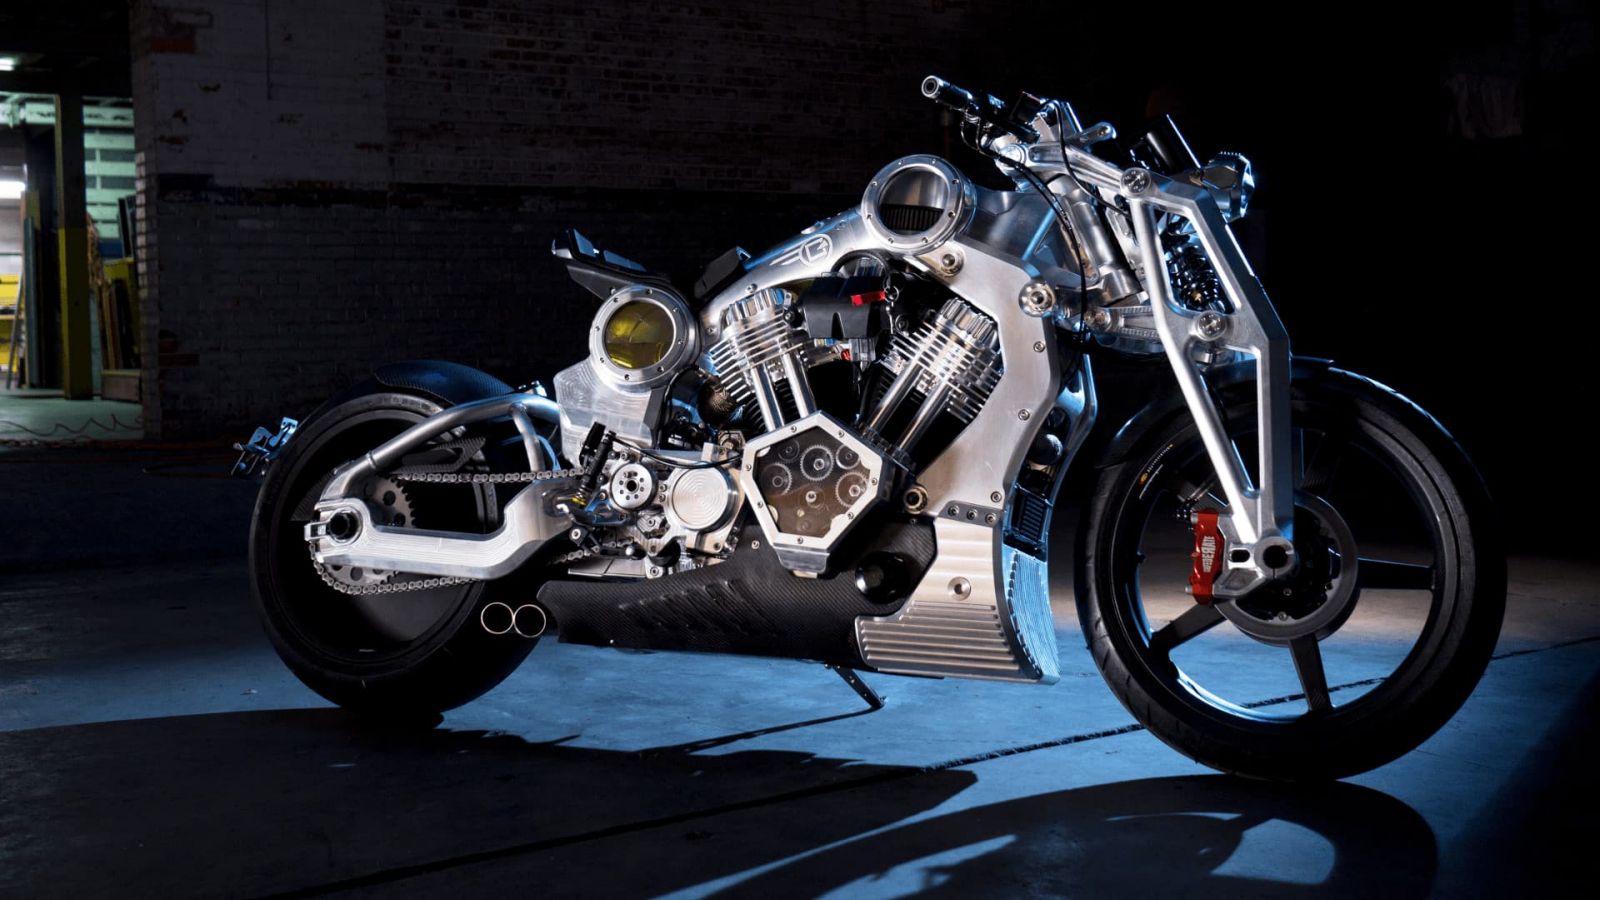 2016 Confederate Motorcycles P51 Combat Fighter